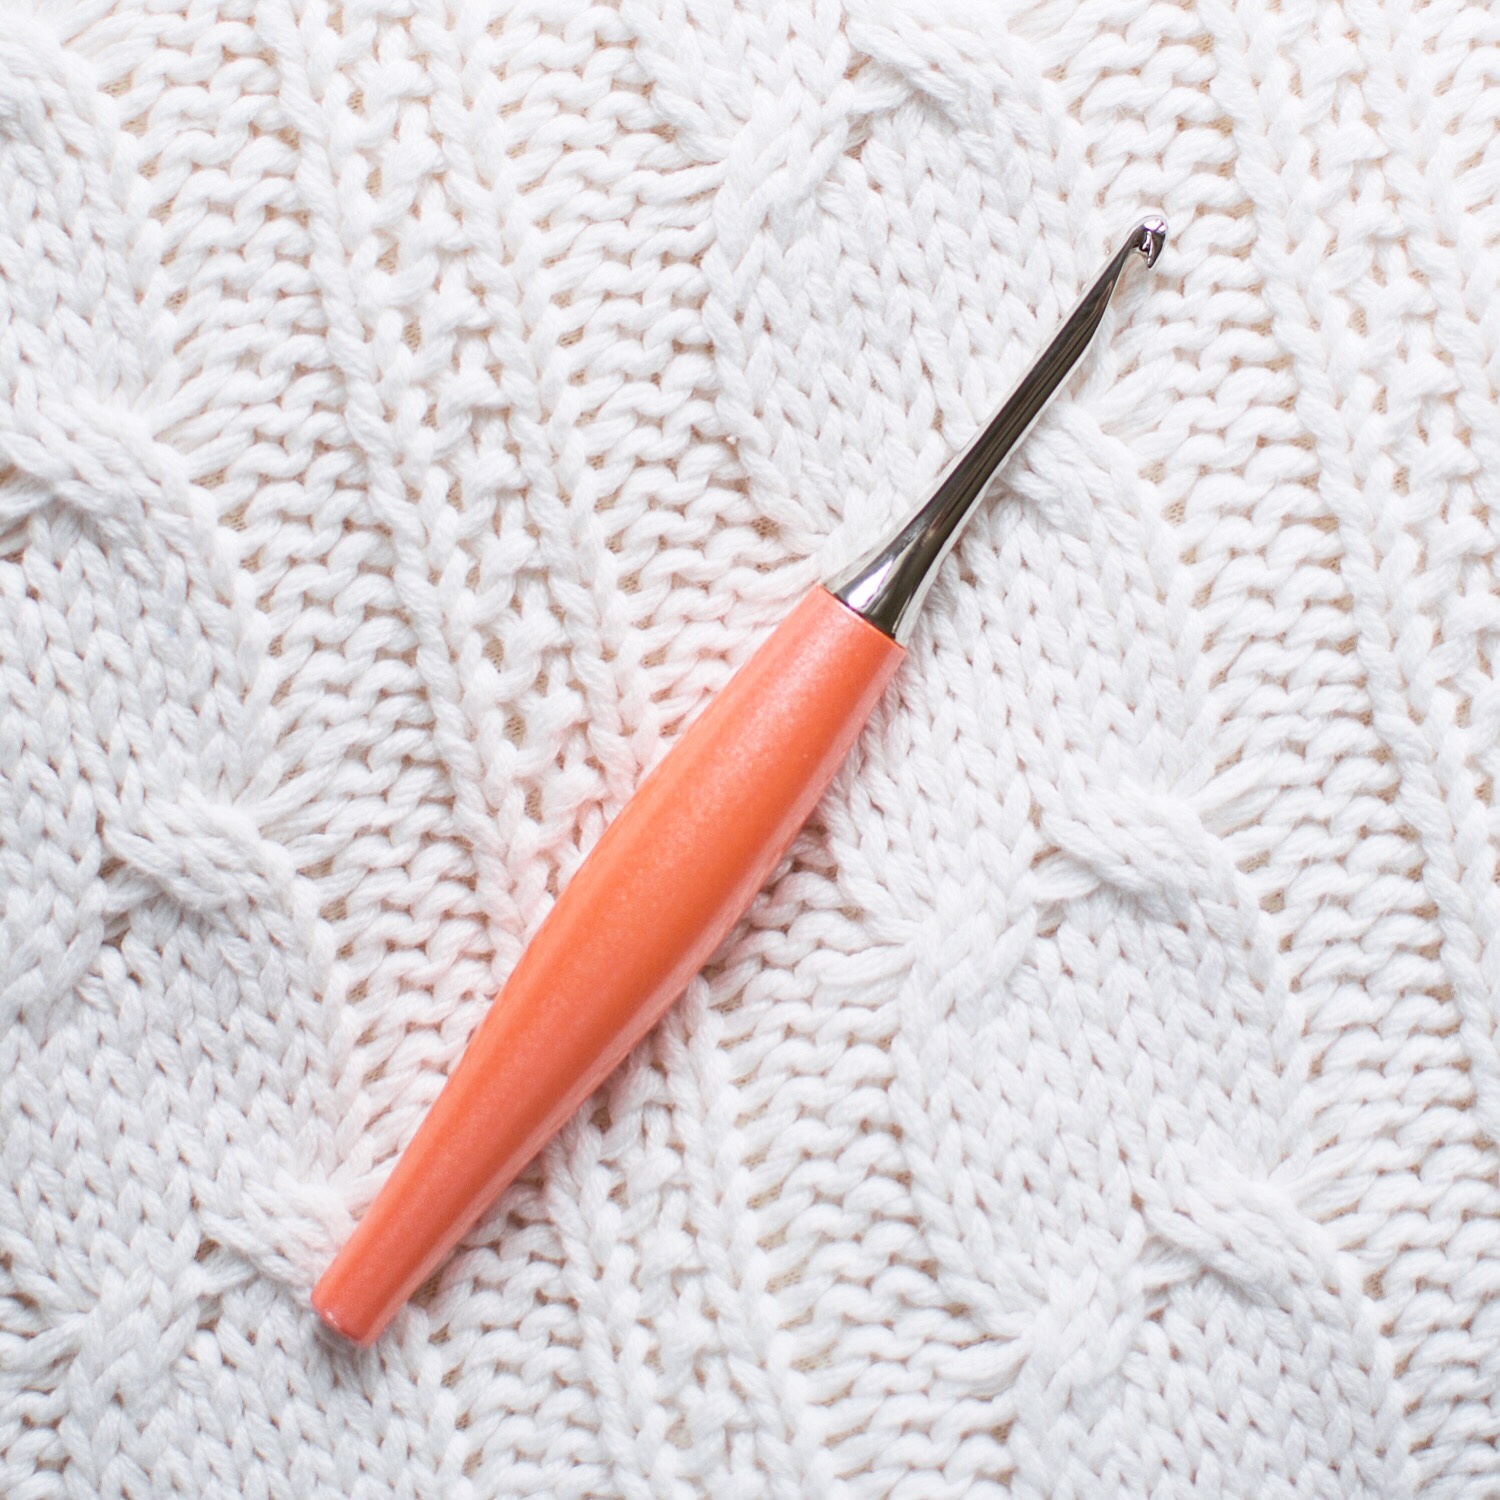 Furls Crochet Odyssey hook review - Comparing with other crochet hooks 